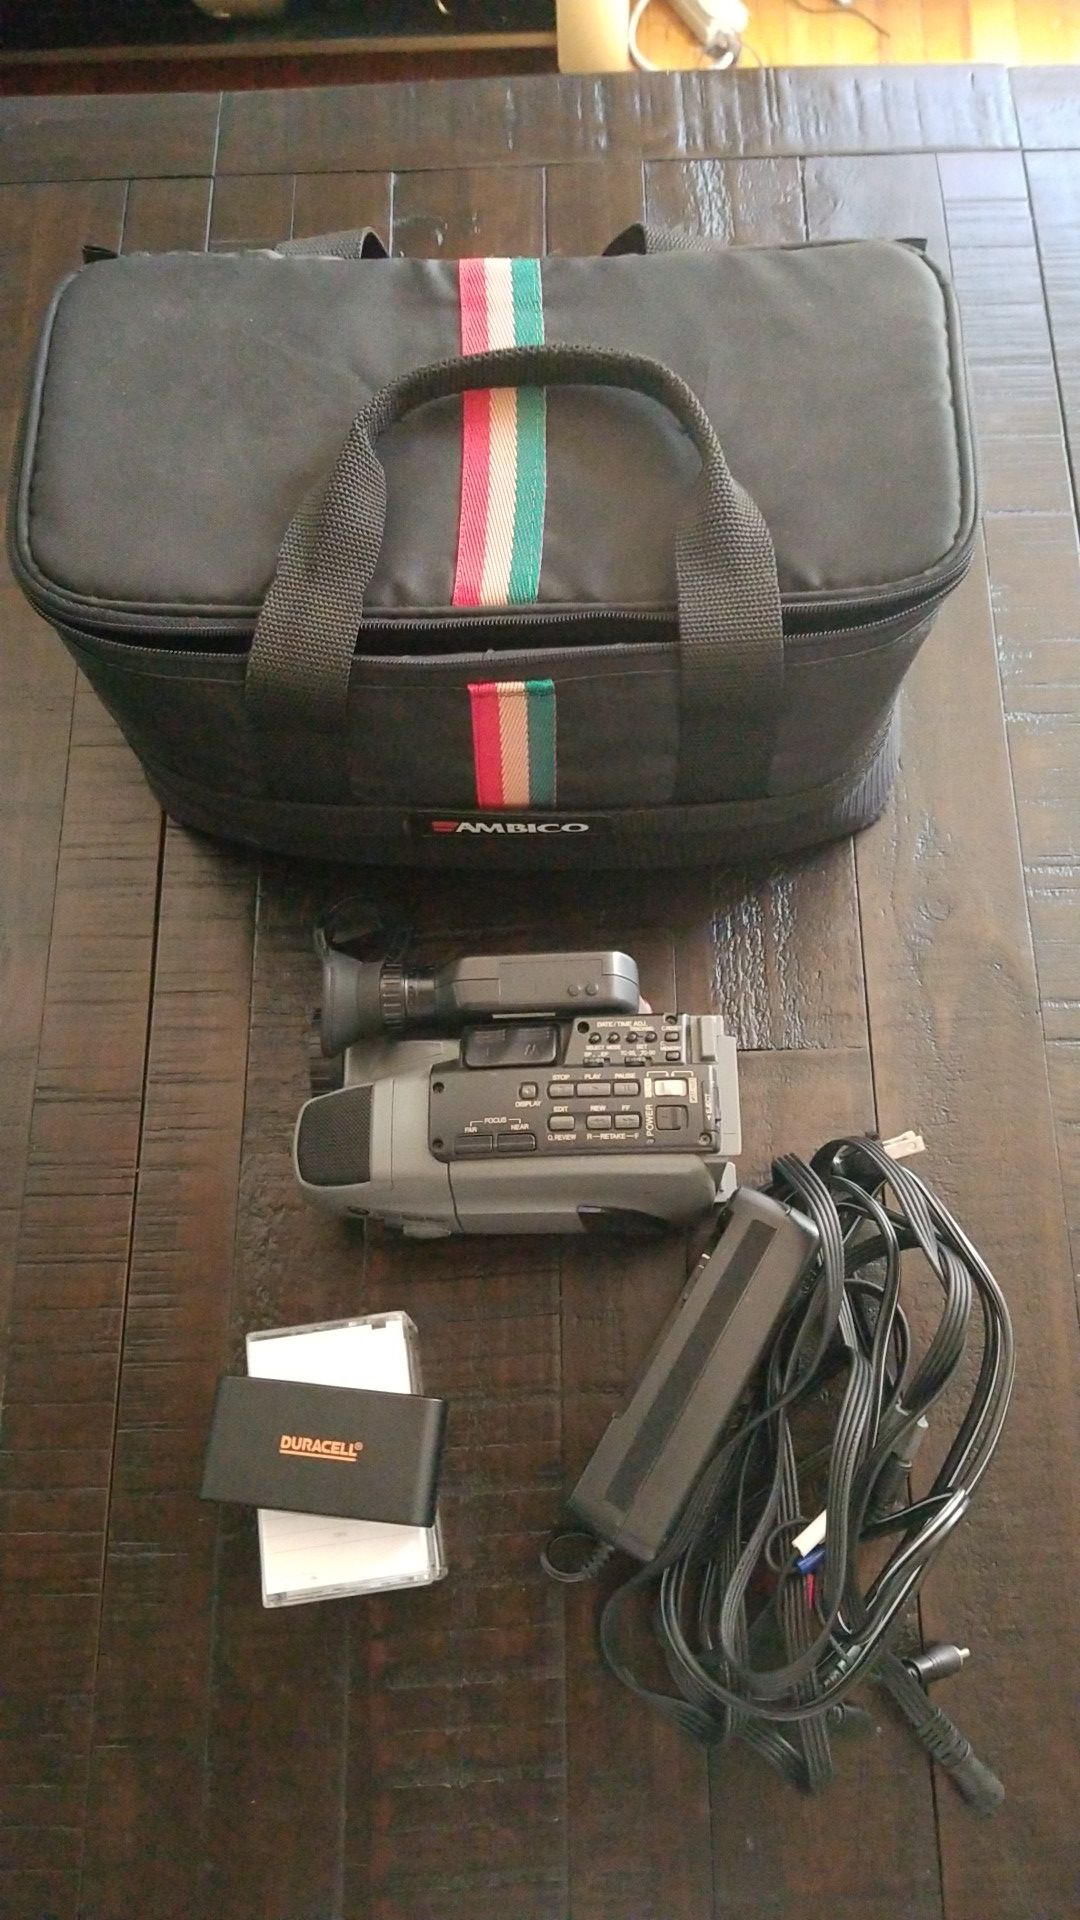 Jvc compact vhs camcorder